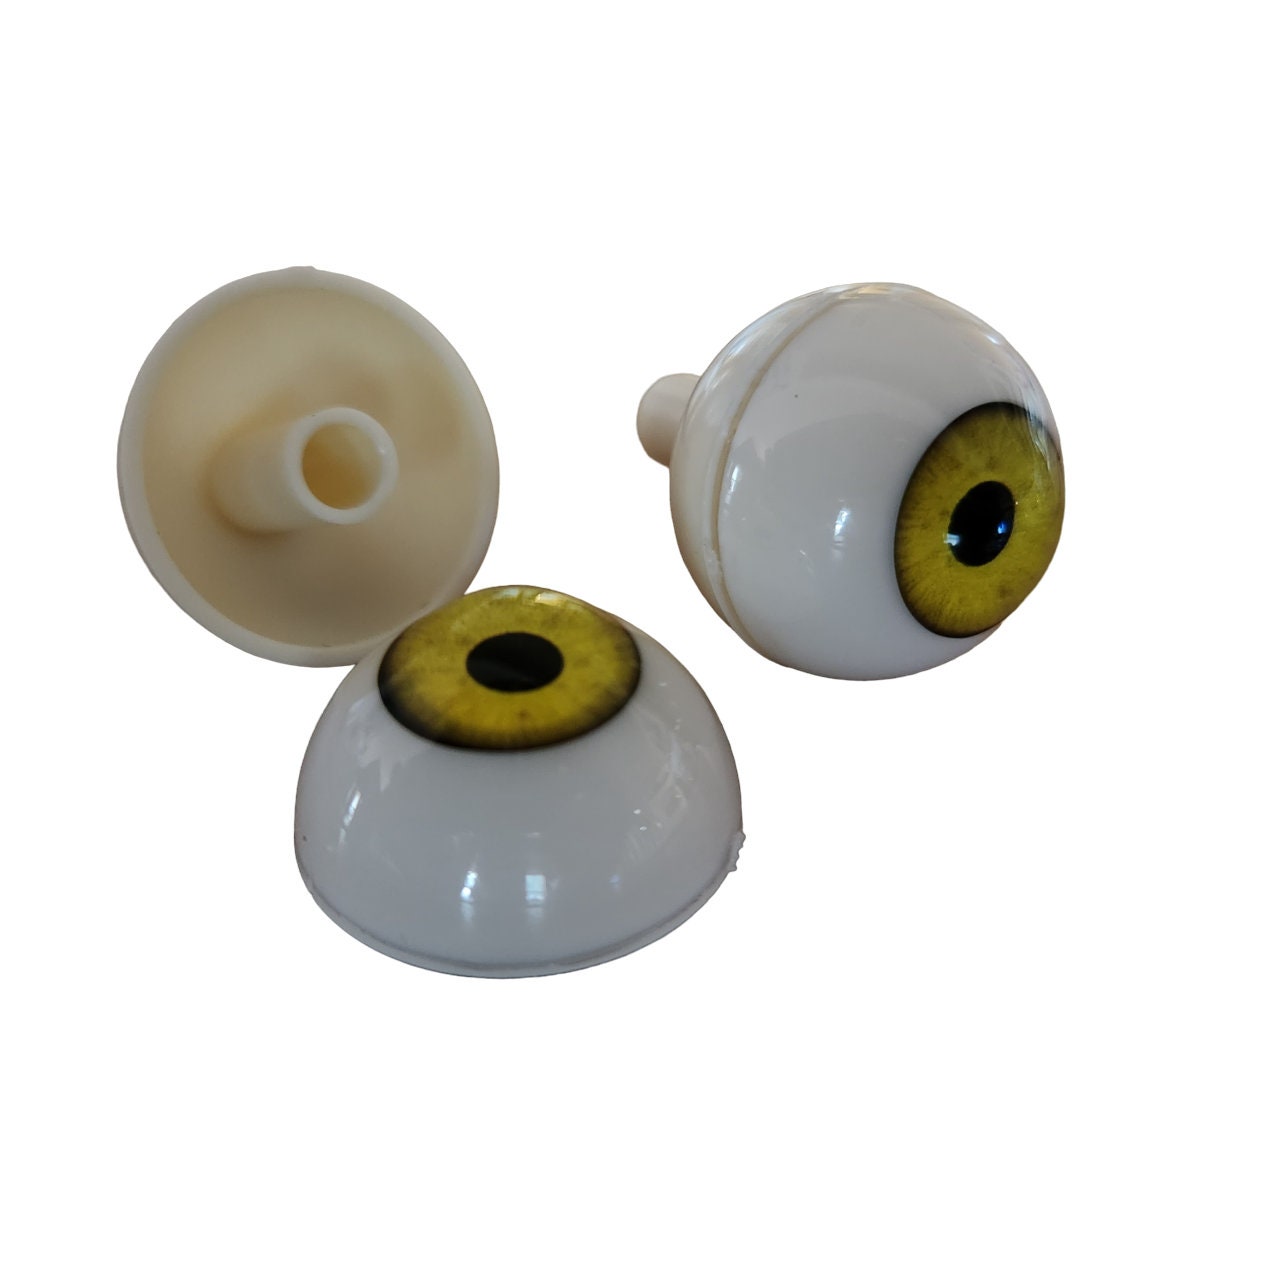 18mm Plastic Eyes Safety Eyes 10 Pairs Mixed Colors 18M10 